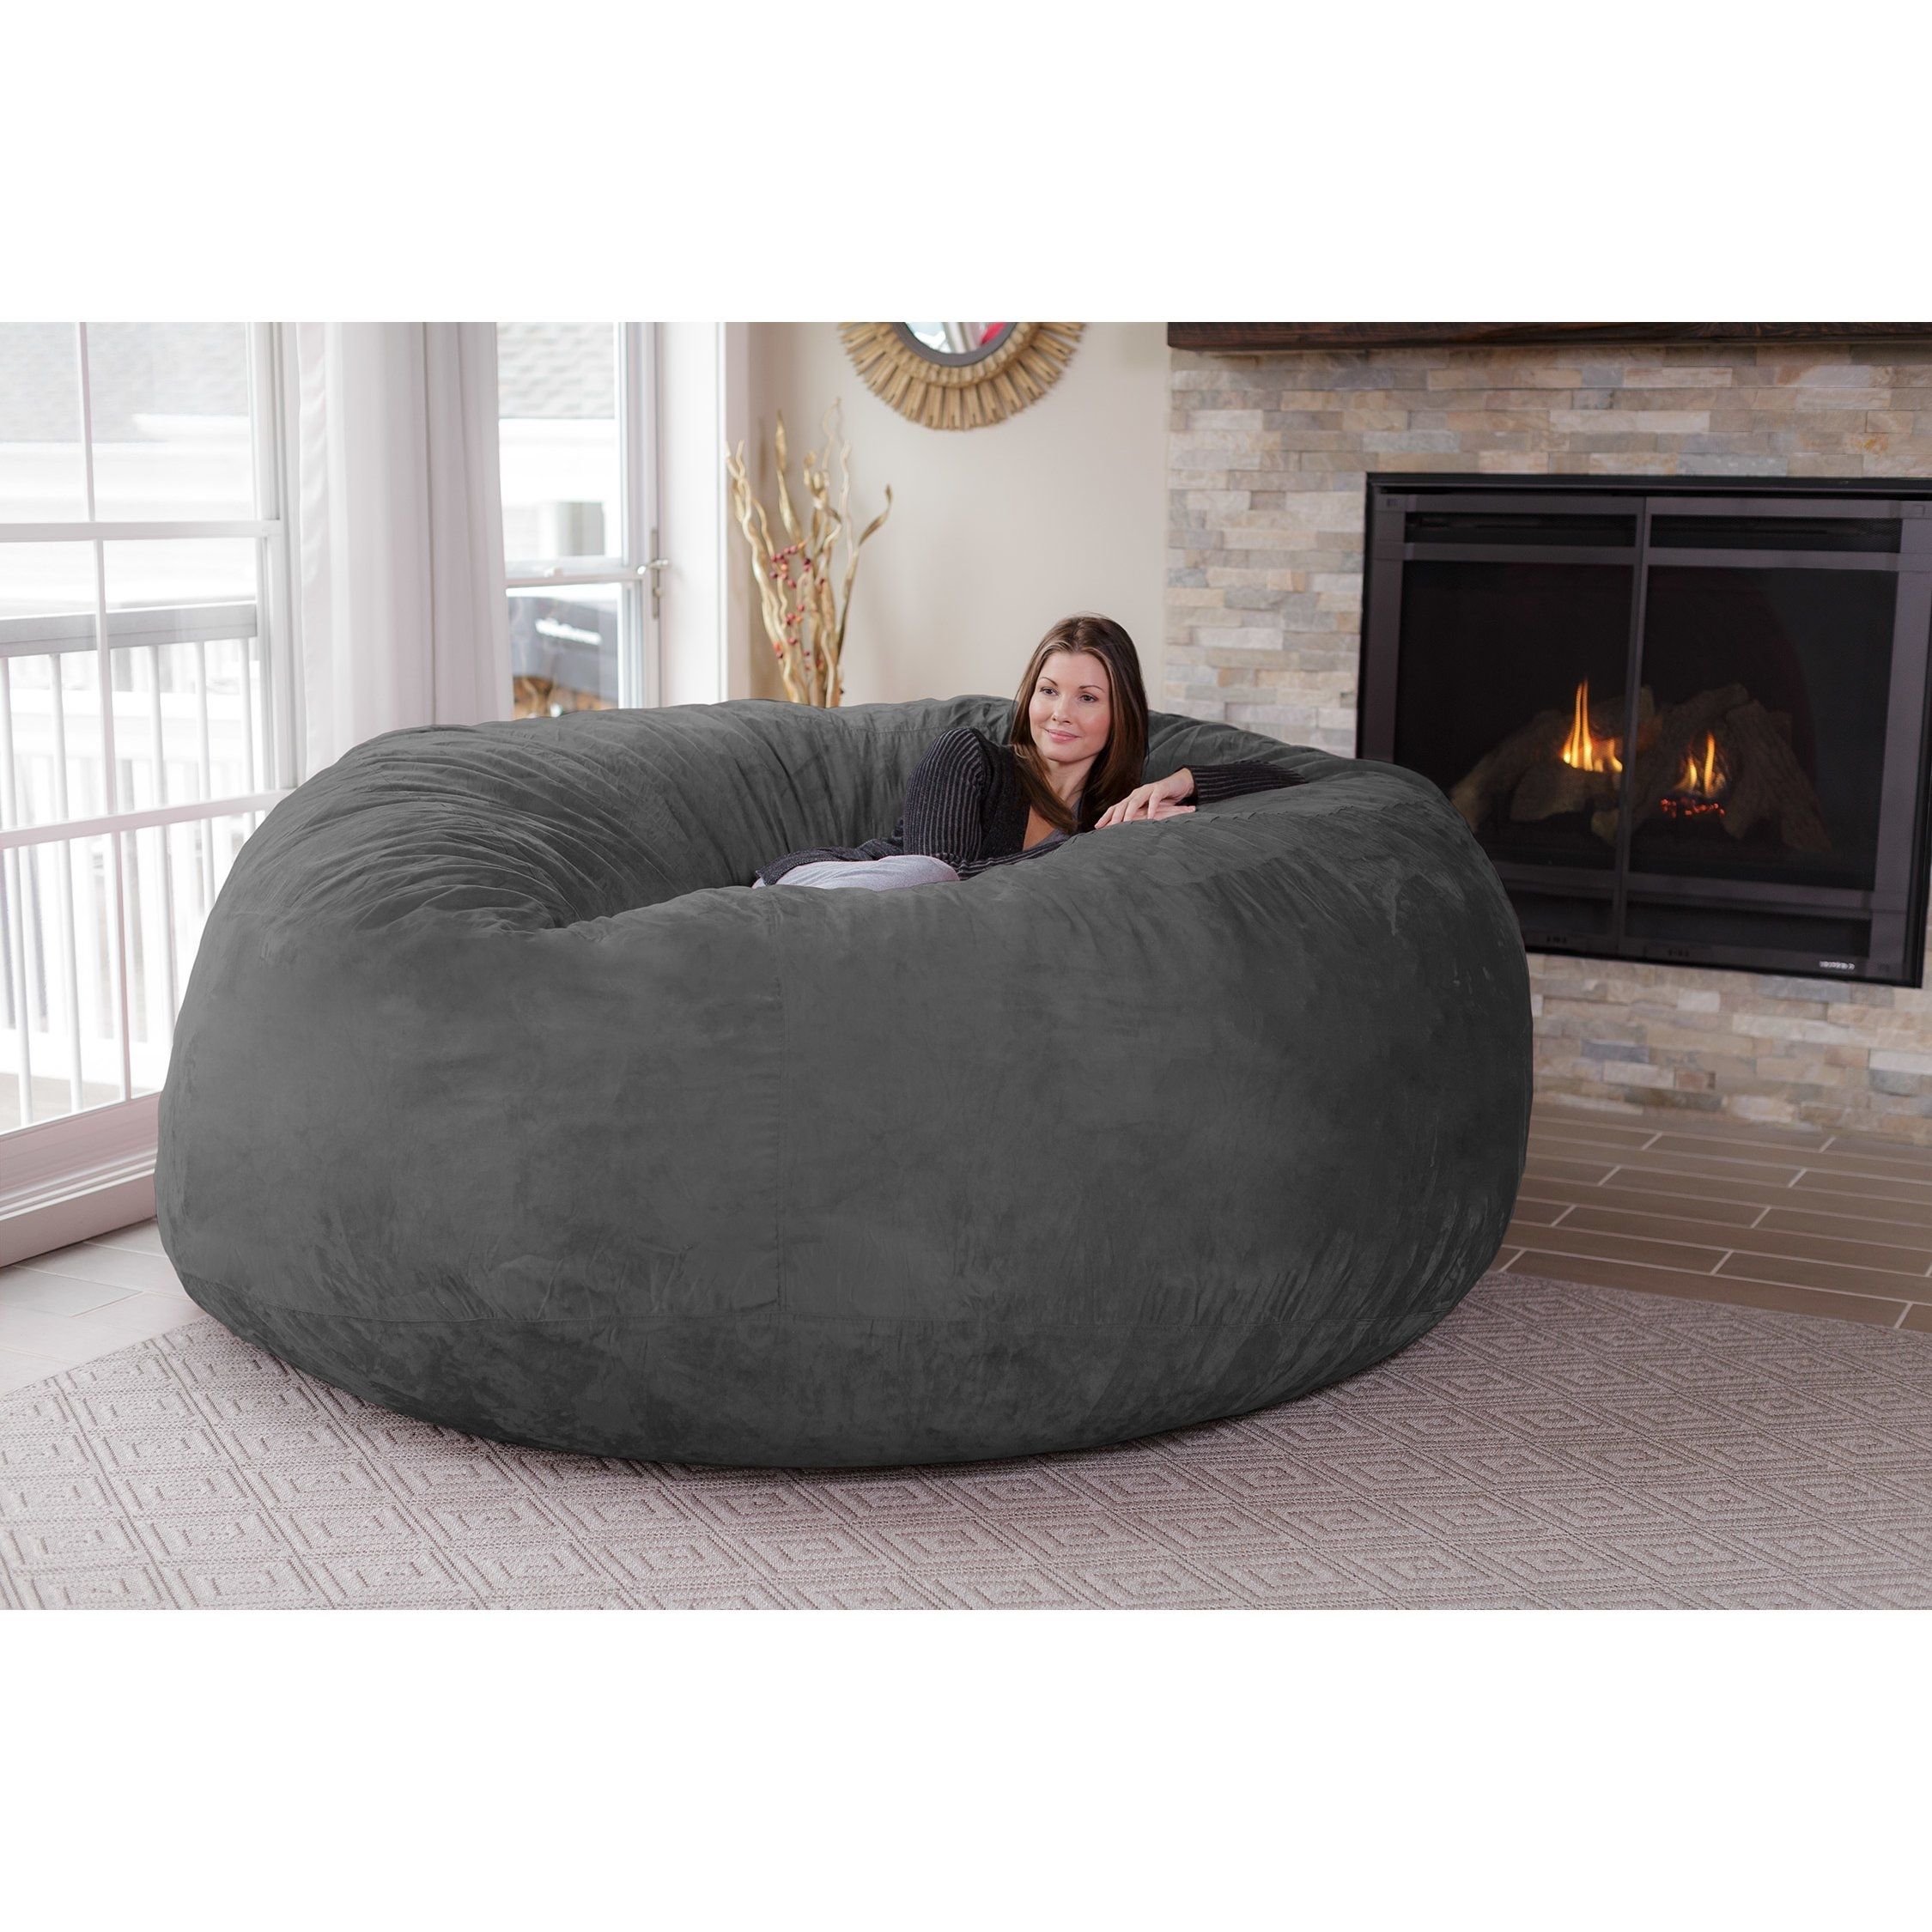 Awesome Bean Bag Couch 22 In Sofas And Couches Set With Bean Bag Couch Intended For Bean Bag Sofas (View 8 of 10)